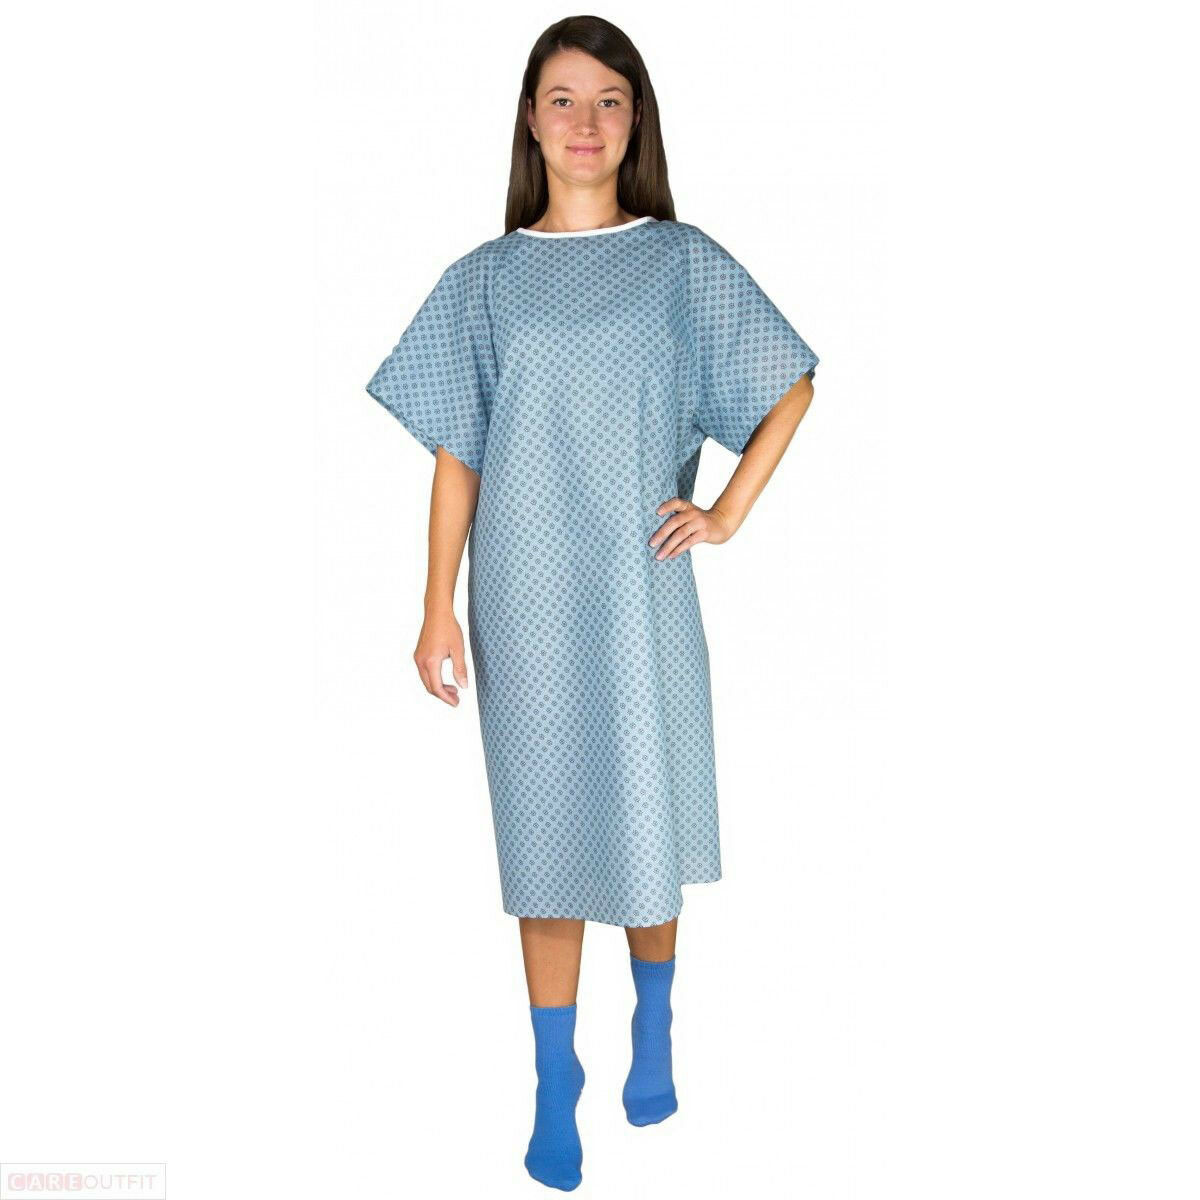 Blue Hospital Patient Gown With Back Ties - One Size Fits All - 1 Pack